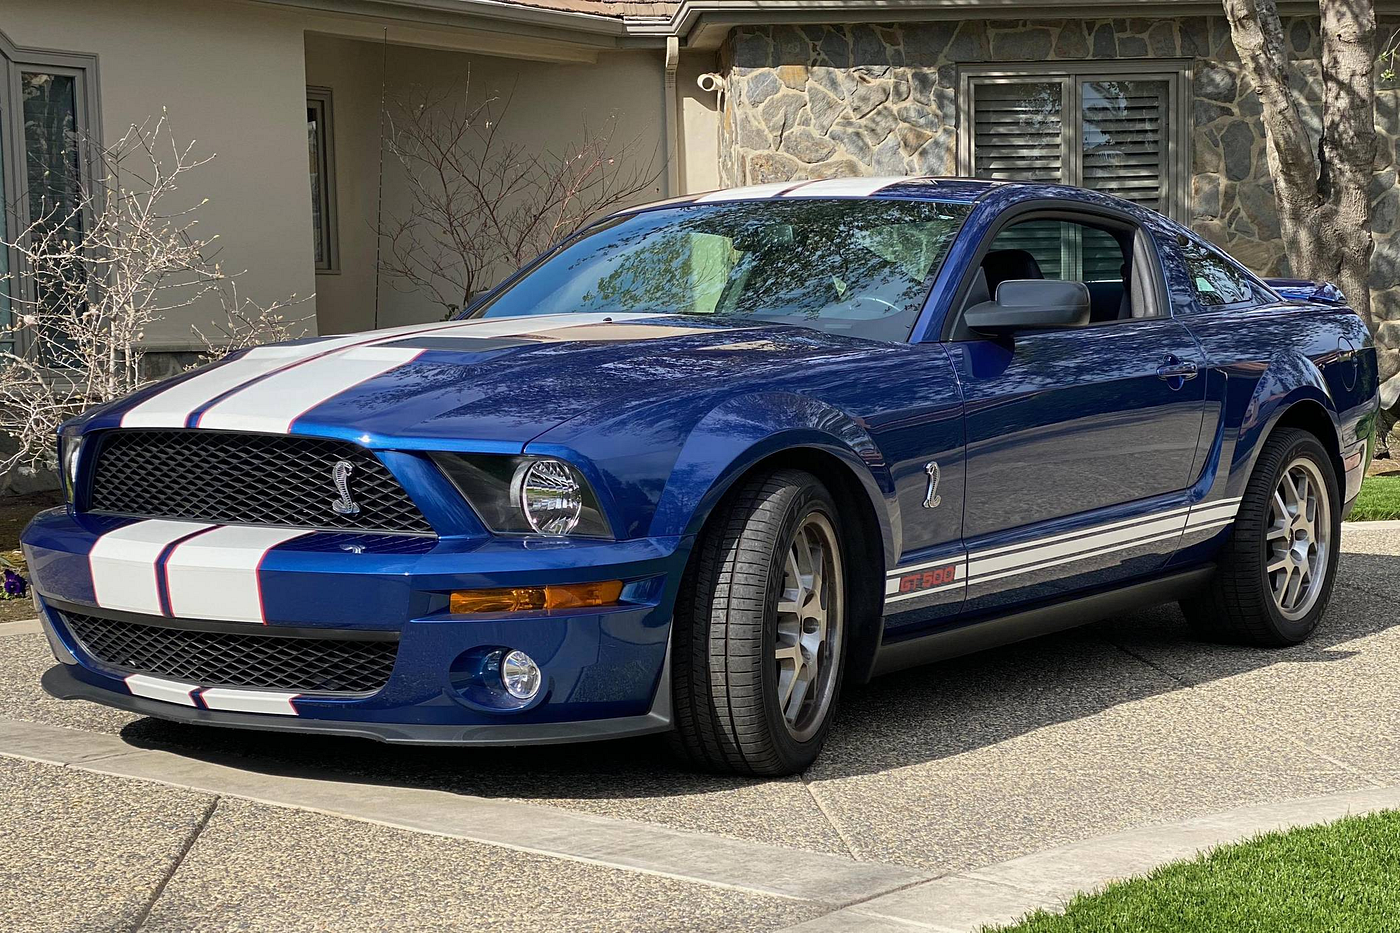 The History of the Shelby Mustang